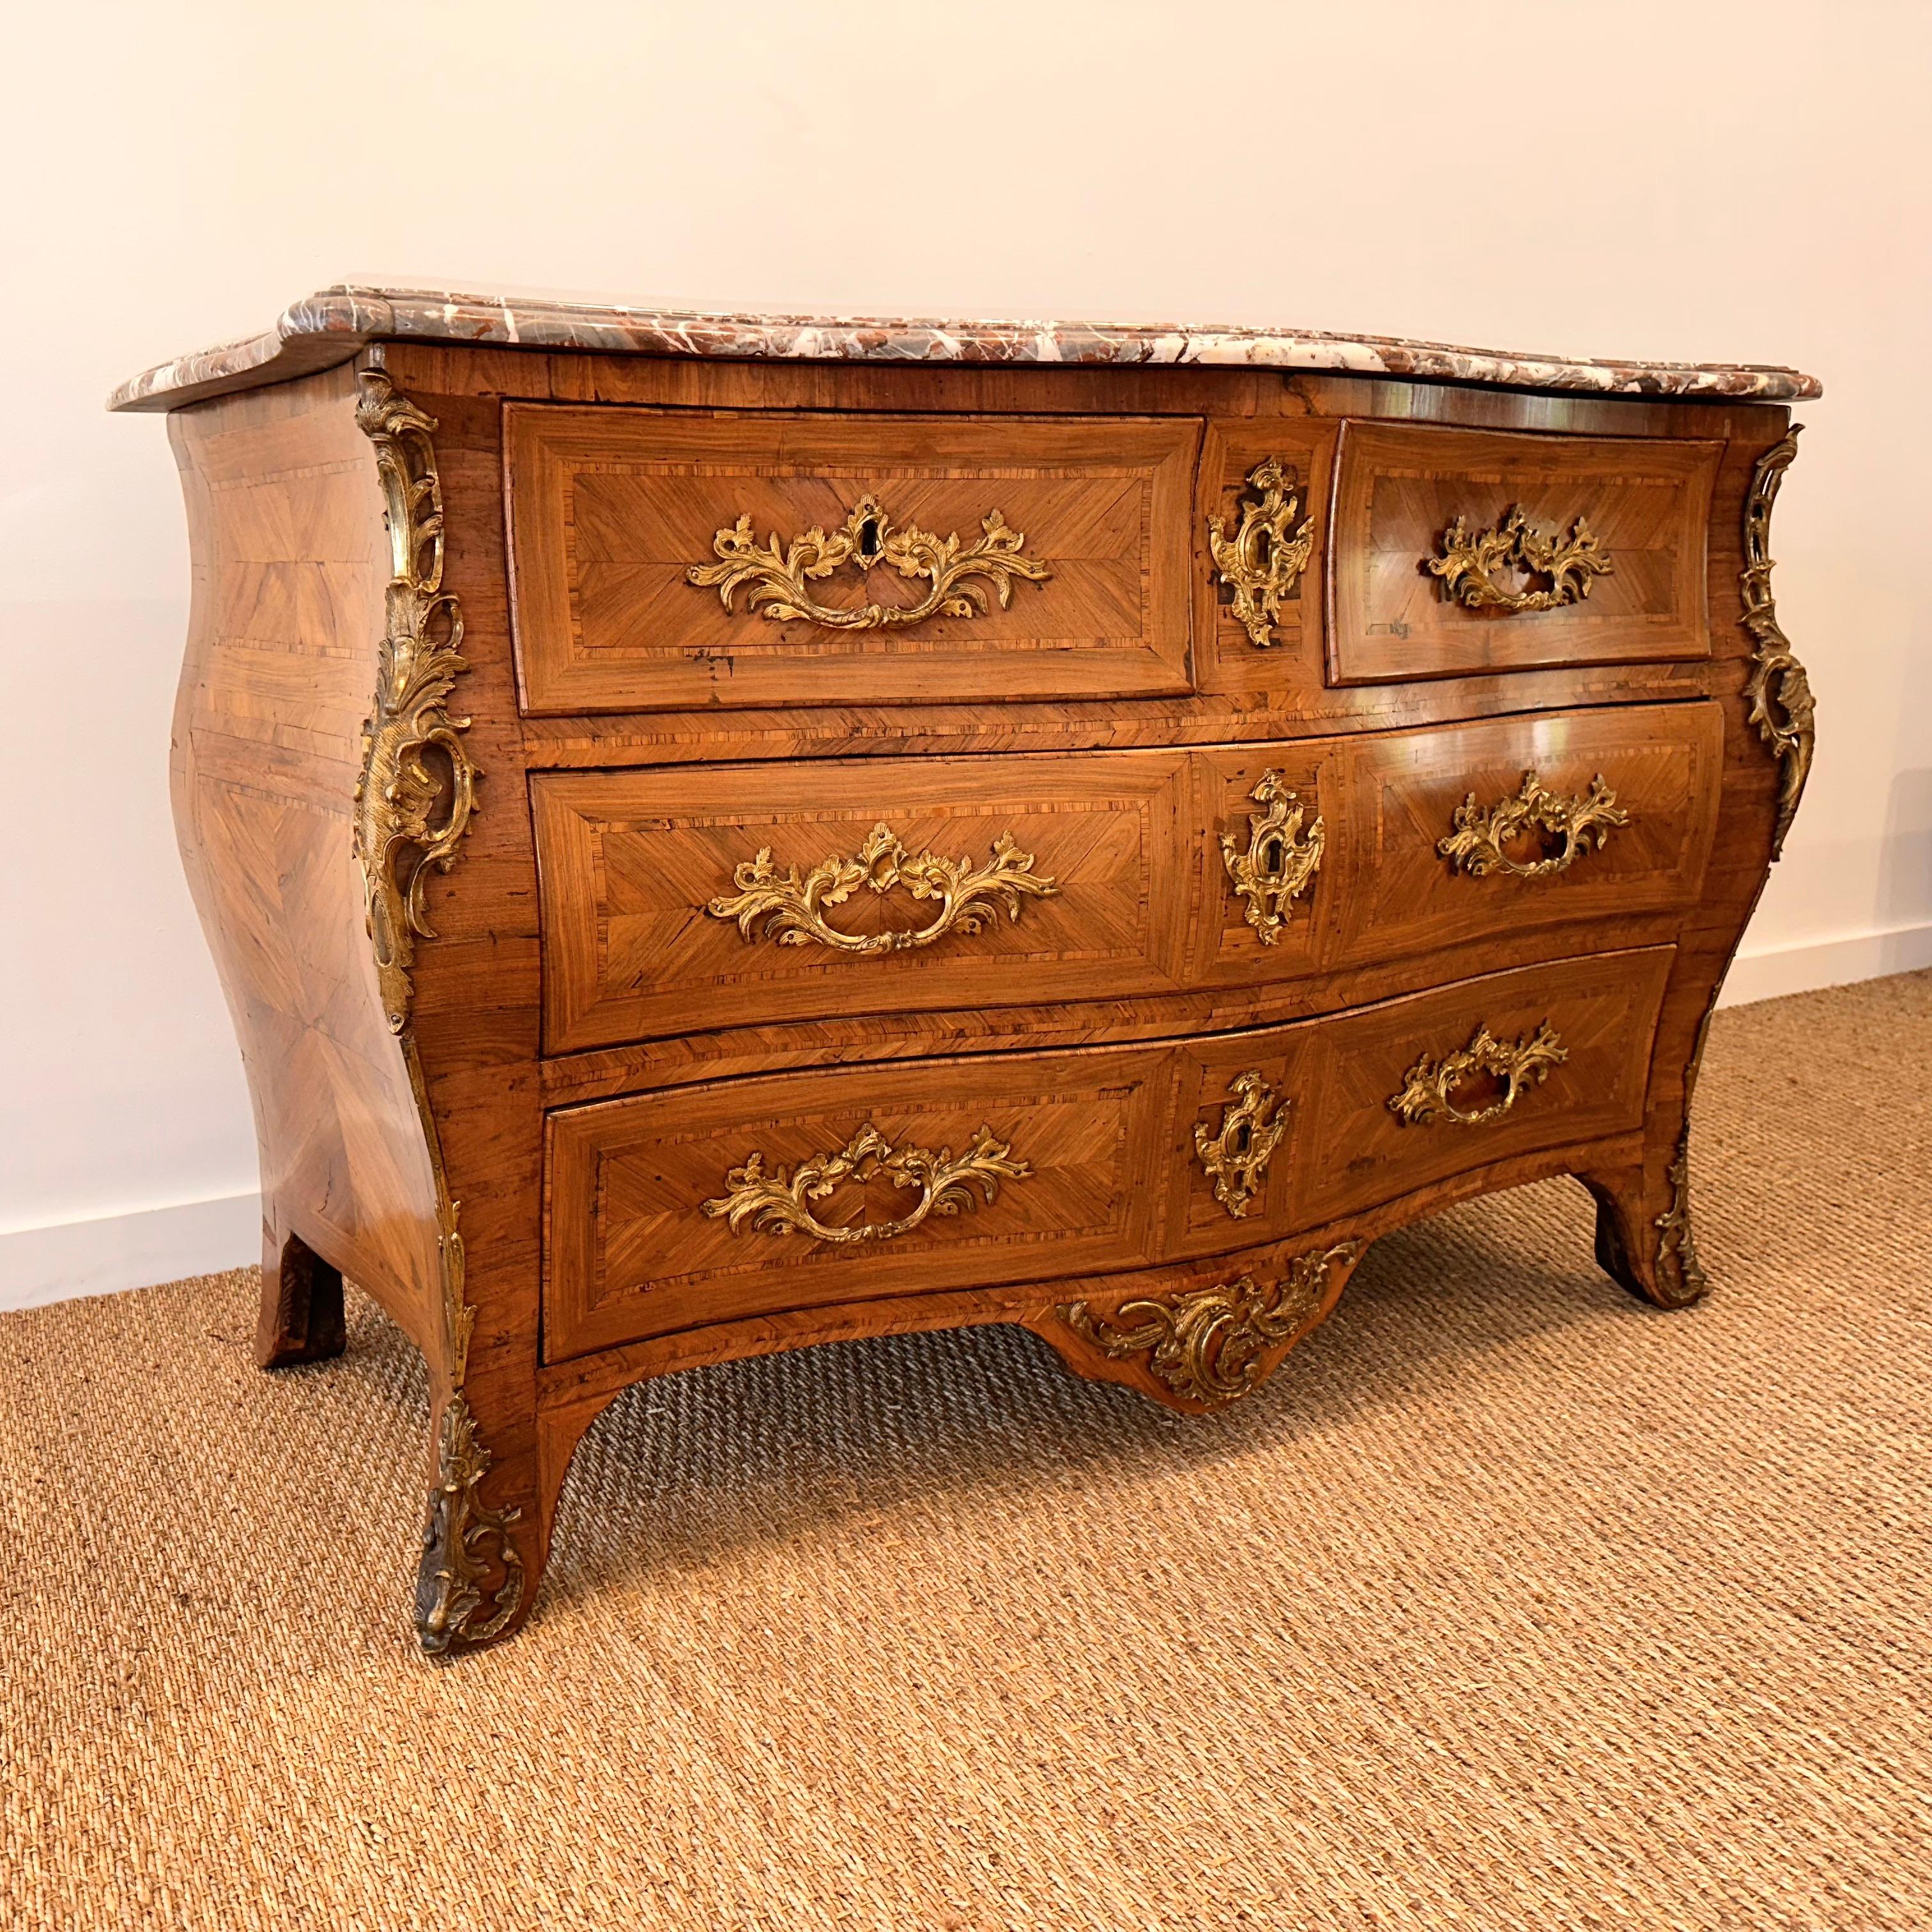 Outstanding example of 18th century Louis XV commode Serpentine Fronted Tombeau Shaped in kingwood veneer, with chased and gilt bronze ornamentation, the front opening with four drawers in three  
rows,  on 
curved legs; Marble top with original